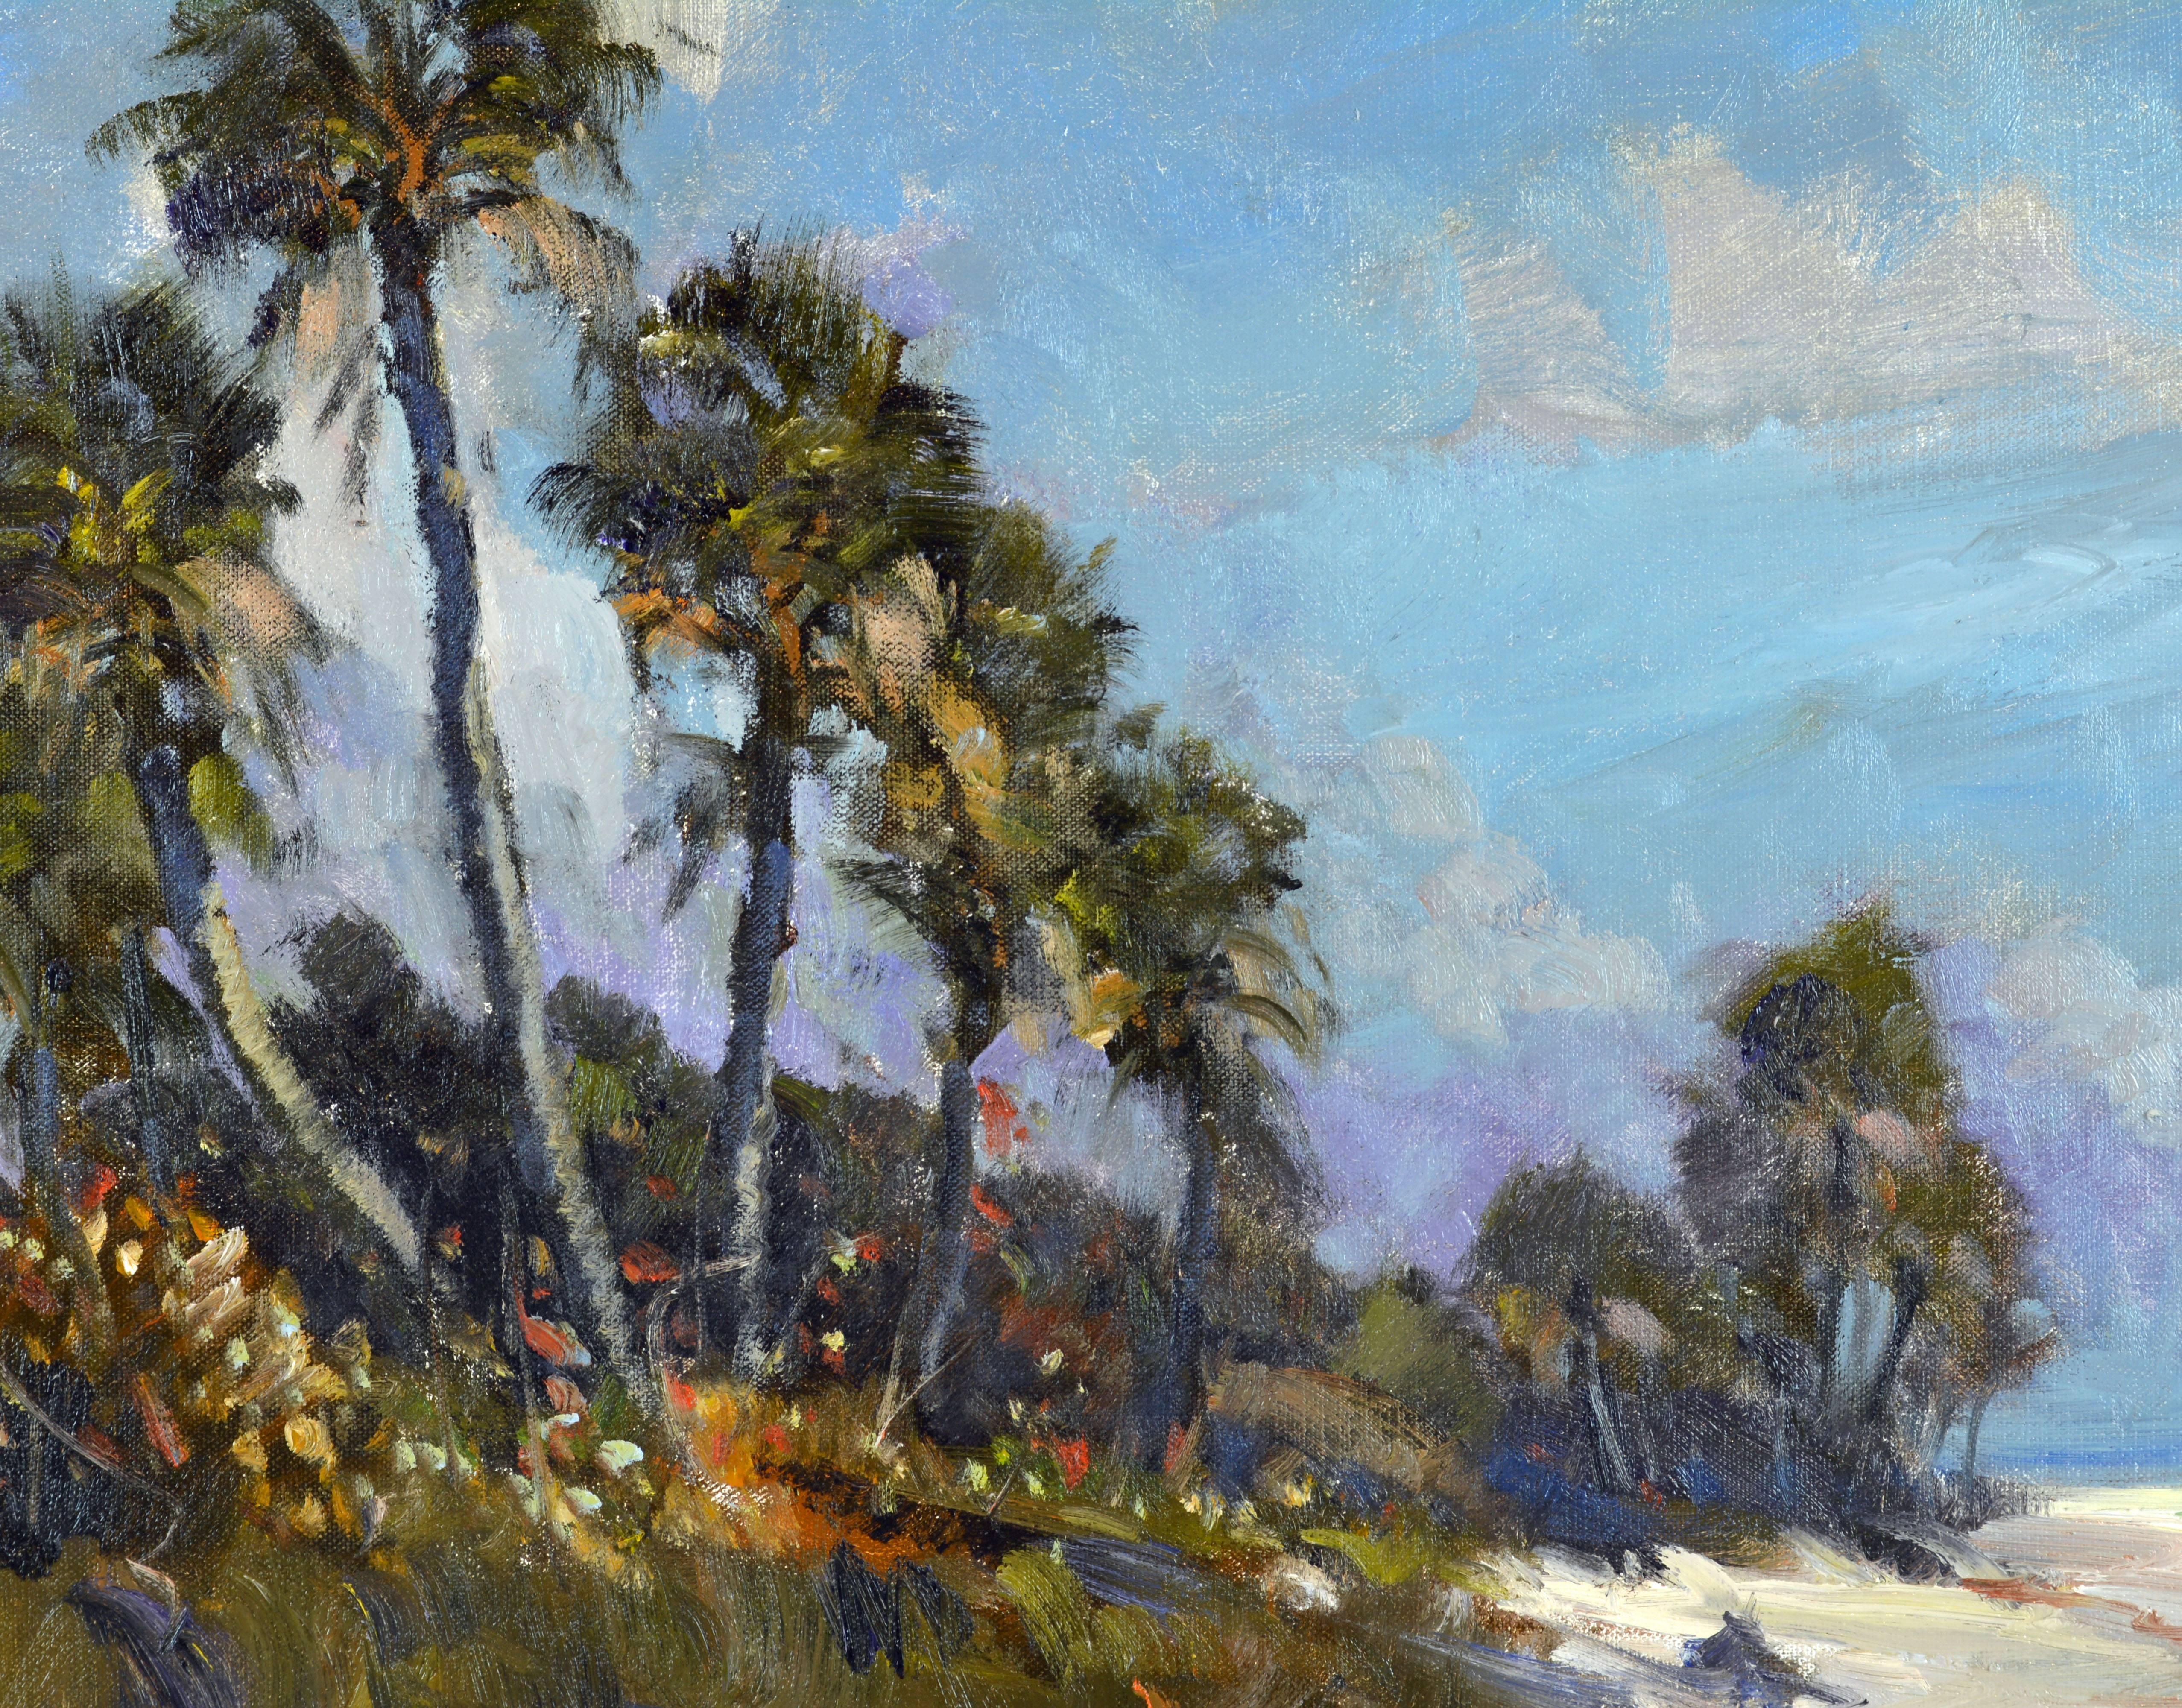 Modern 'Sable Palms' Florida Impressionism by Robert C. Gruppe, American